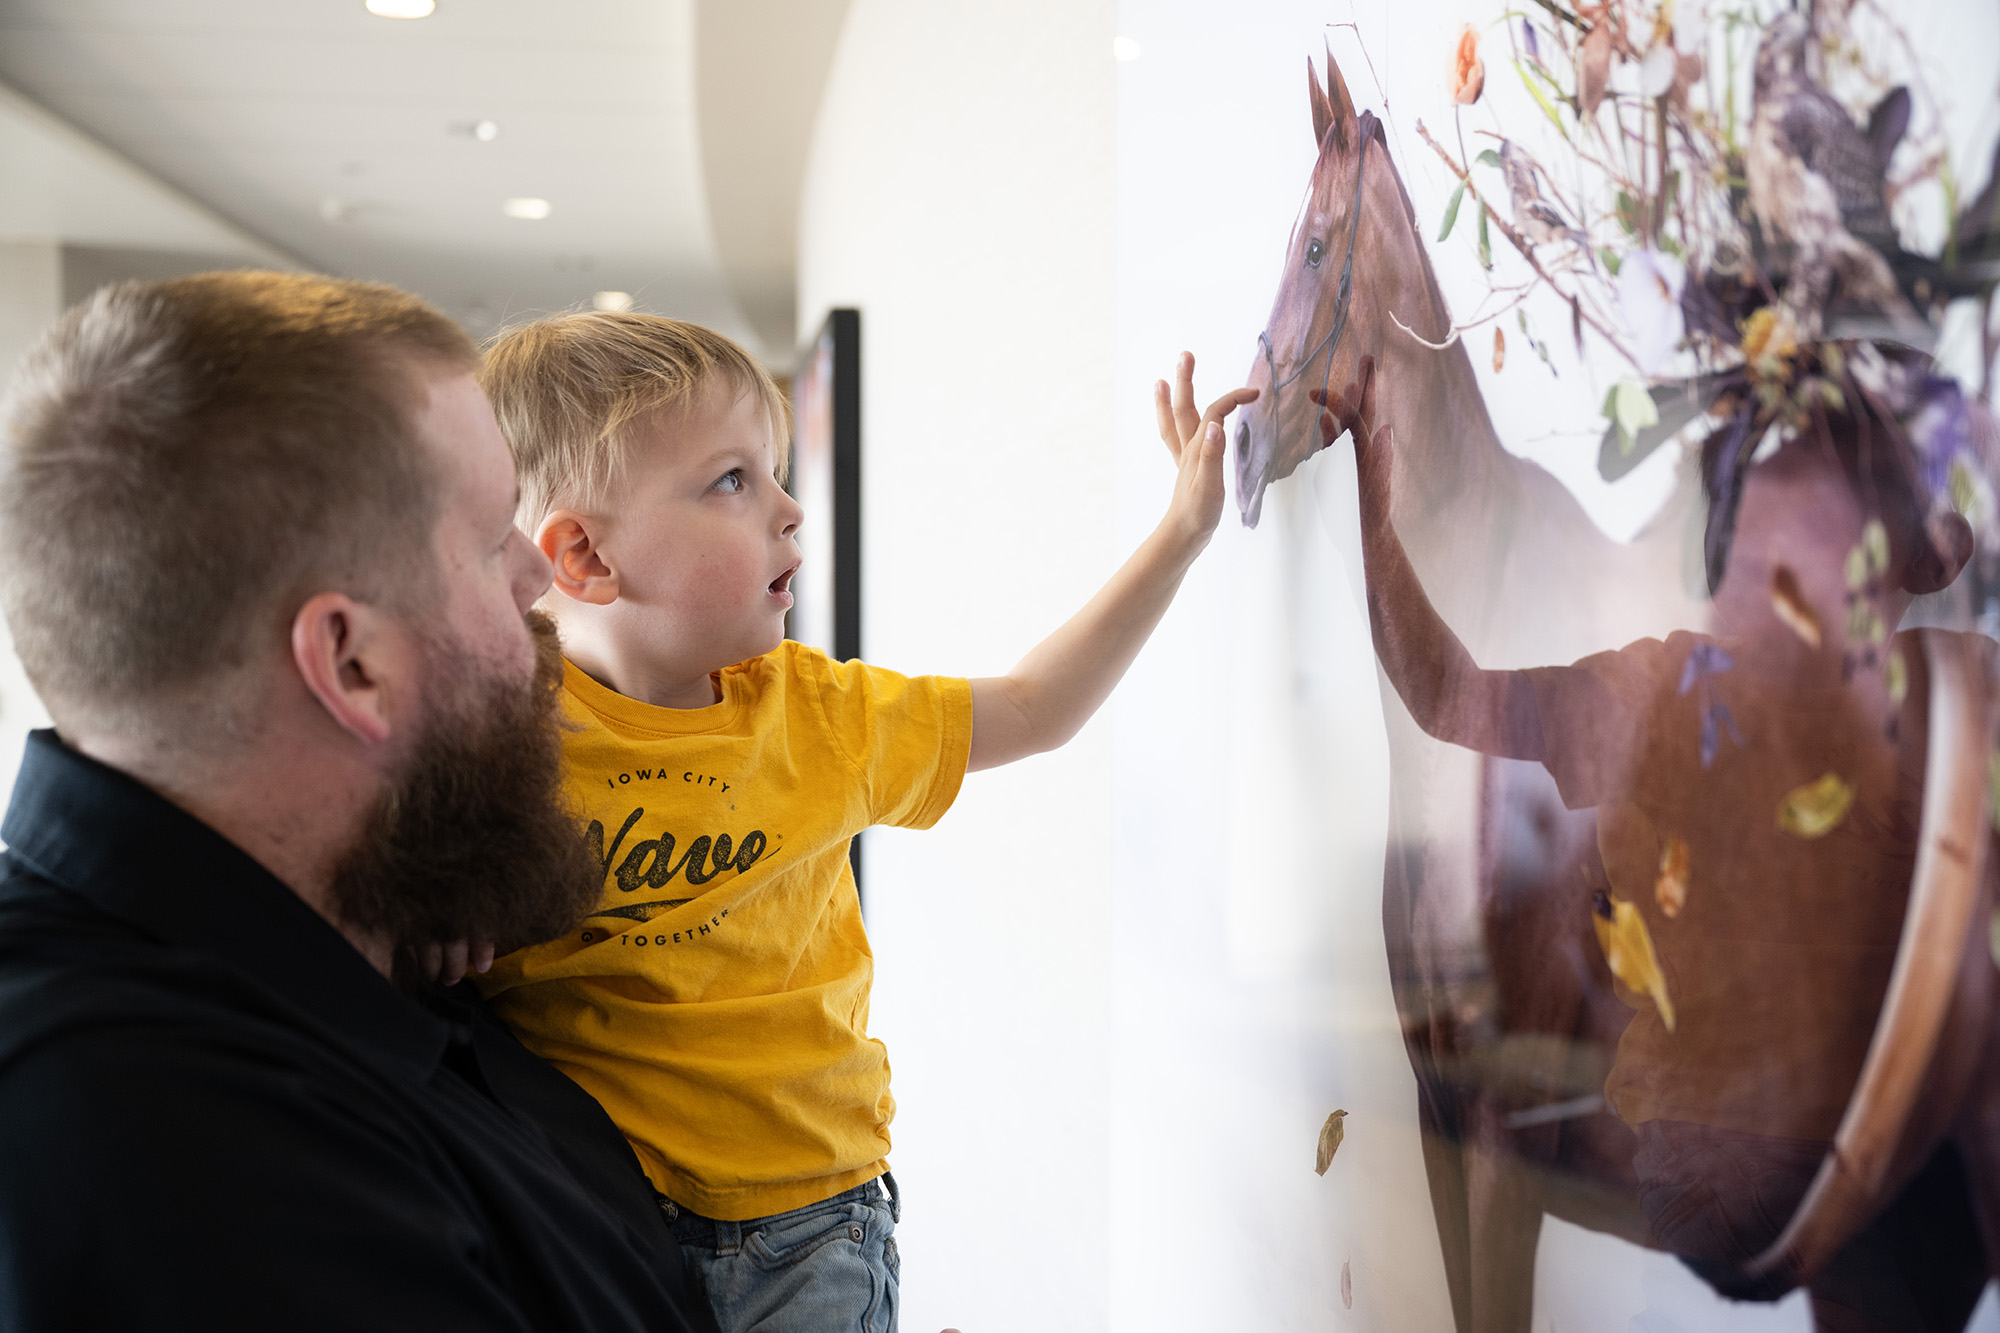 Liam Mattson, held by his father, reaches toward some artwork